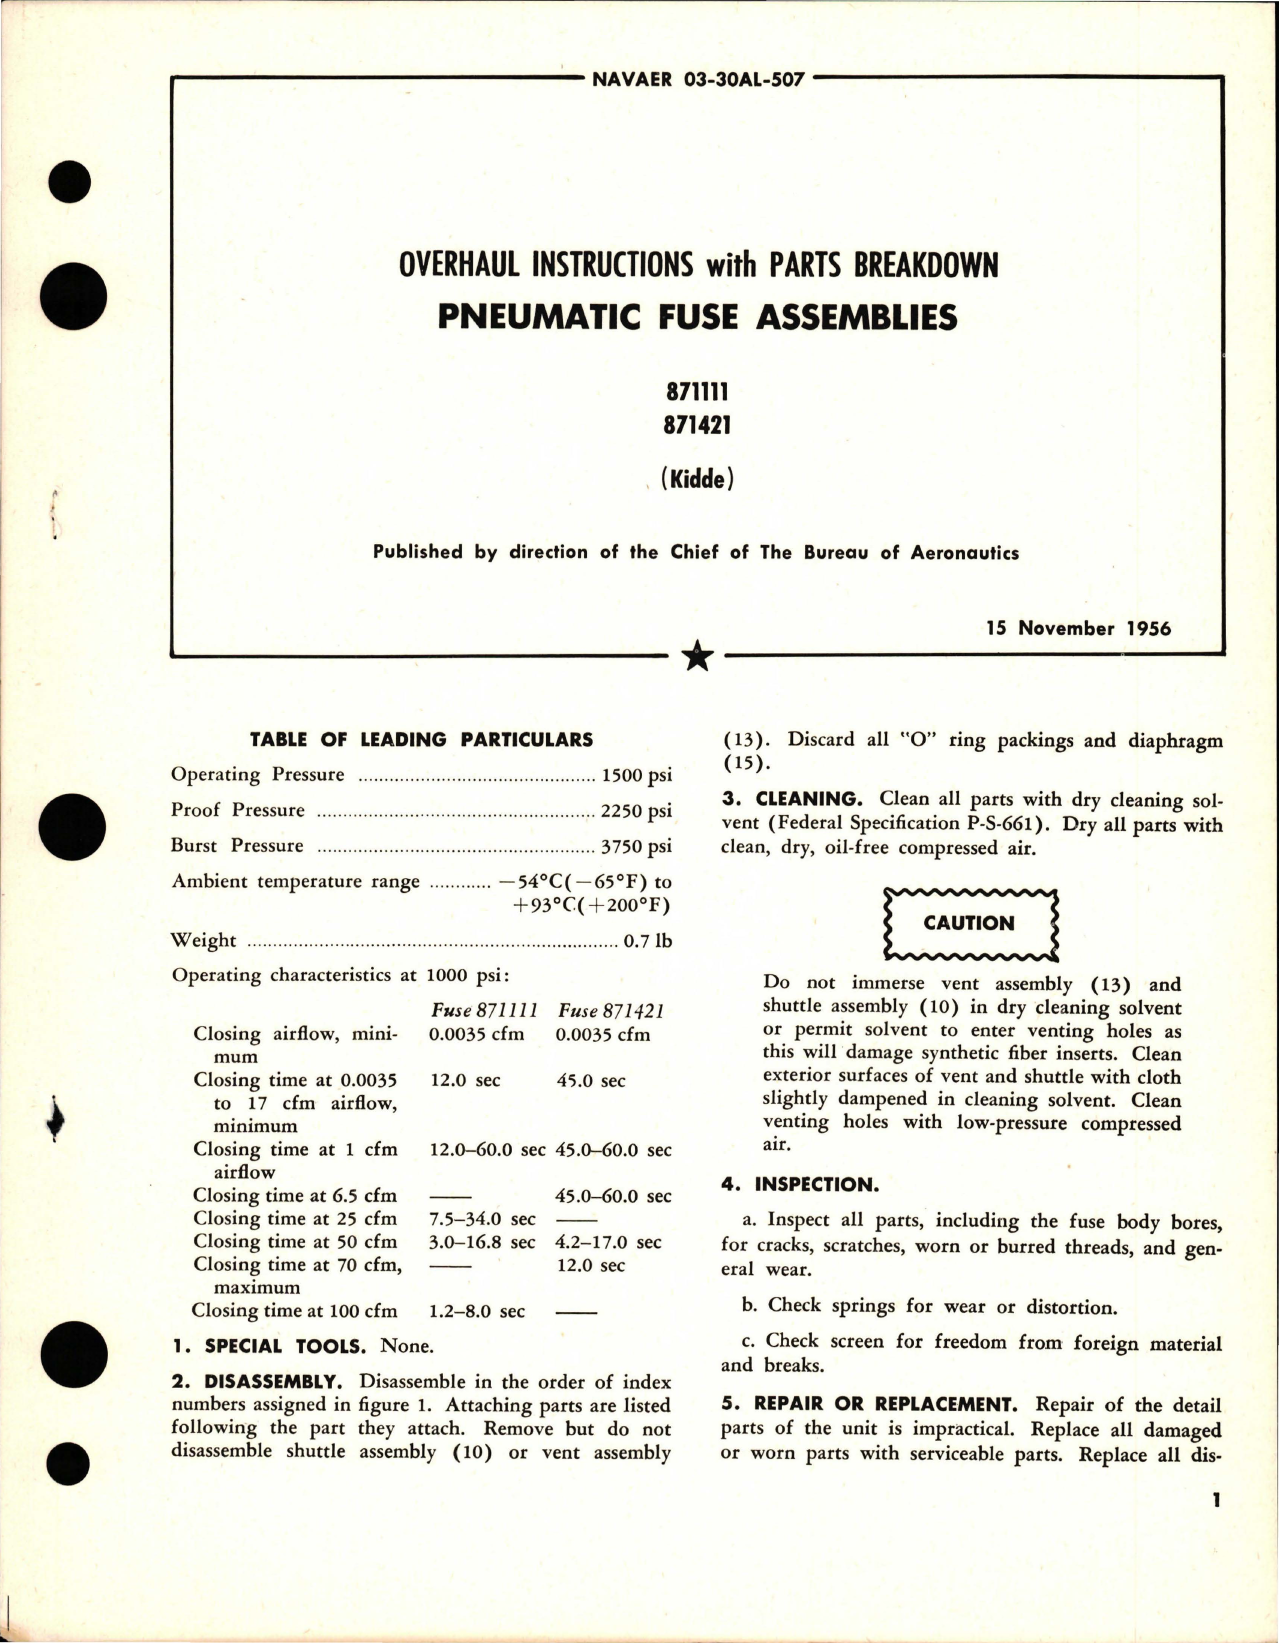 Sample page 1 from AirCorps Library document: Overhaul Instructions with Parts Breakdown for Pneumatic Fuse Assemblies - 871111 and 871421